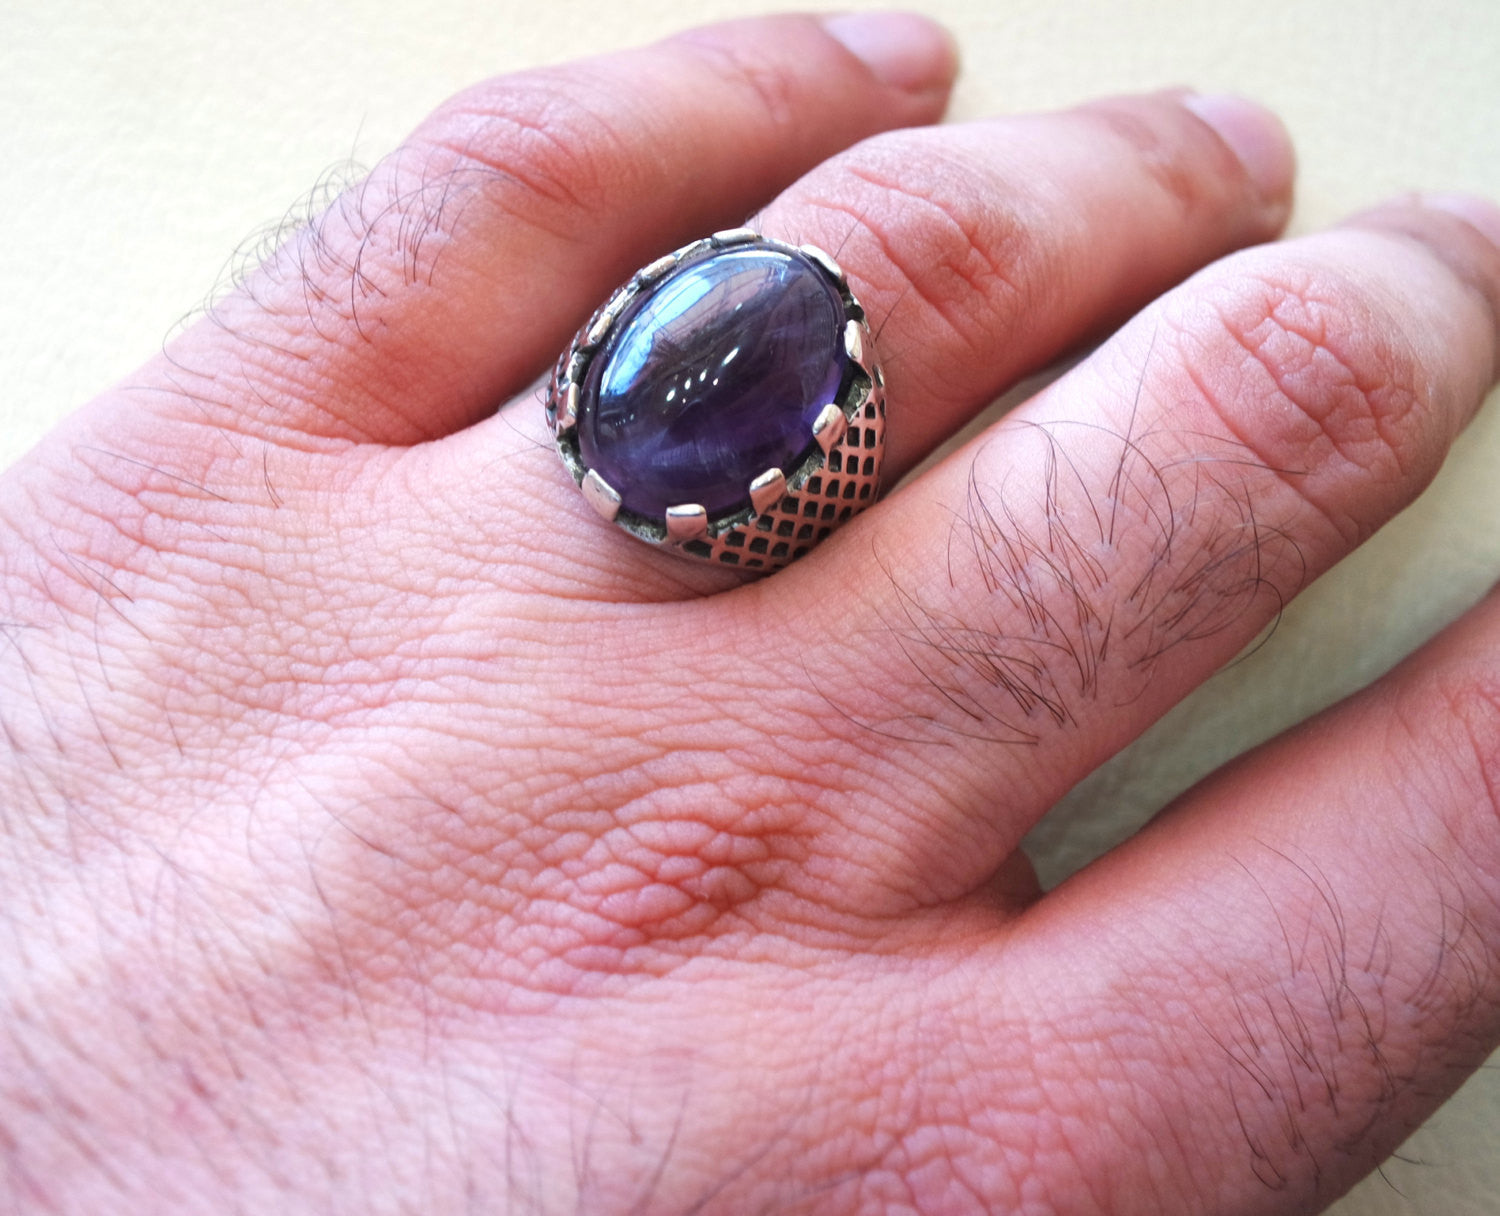 purple amethyst agate natural cabochon sterling silver 925 men ring vintage arabic turkish ottoman antique style jewelry oval  gem all sizes